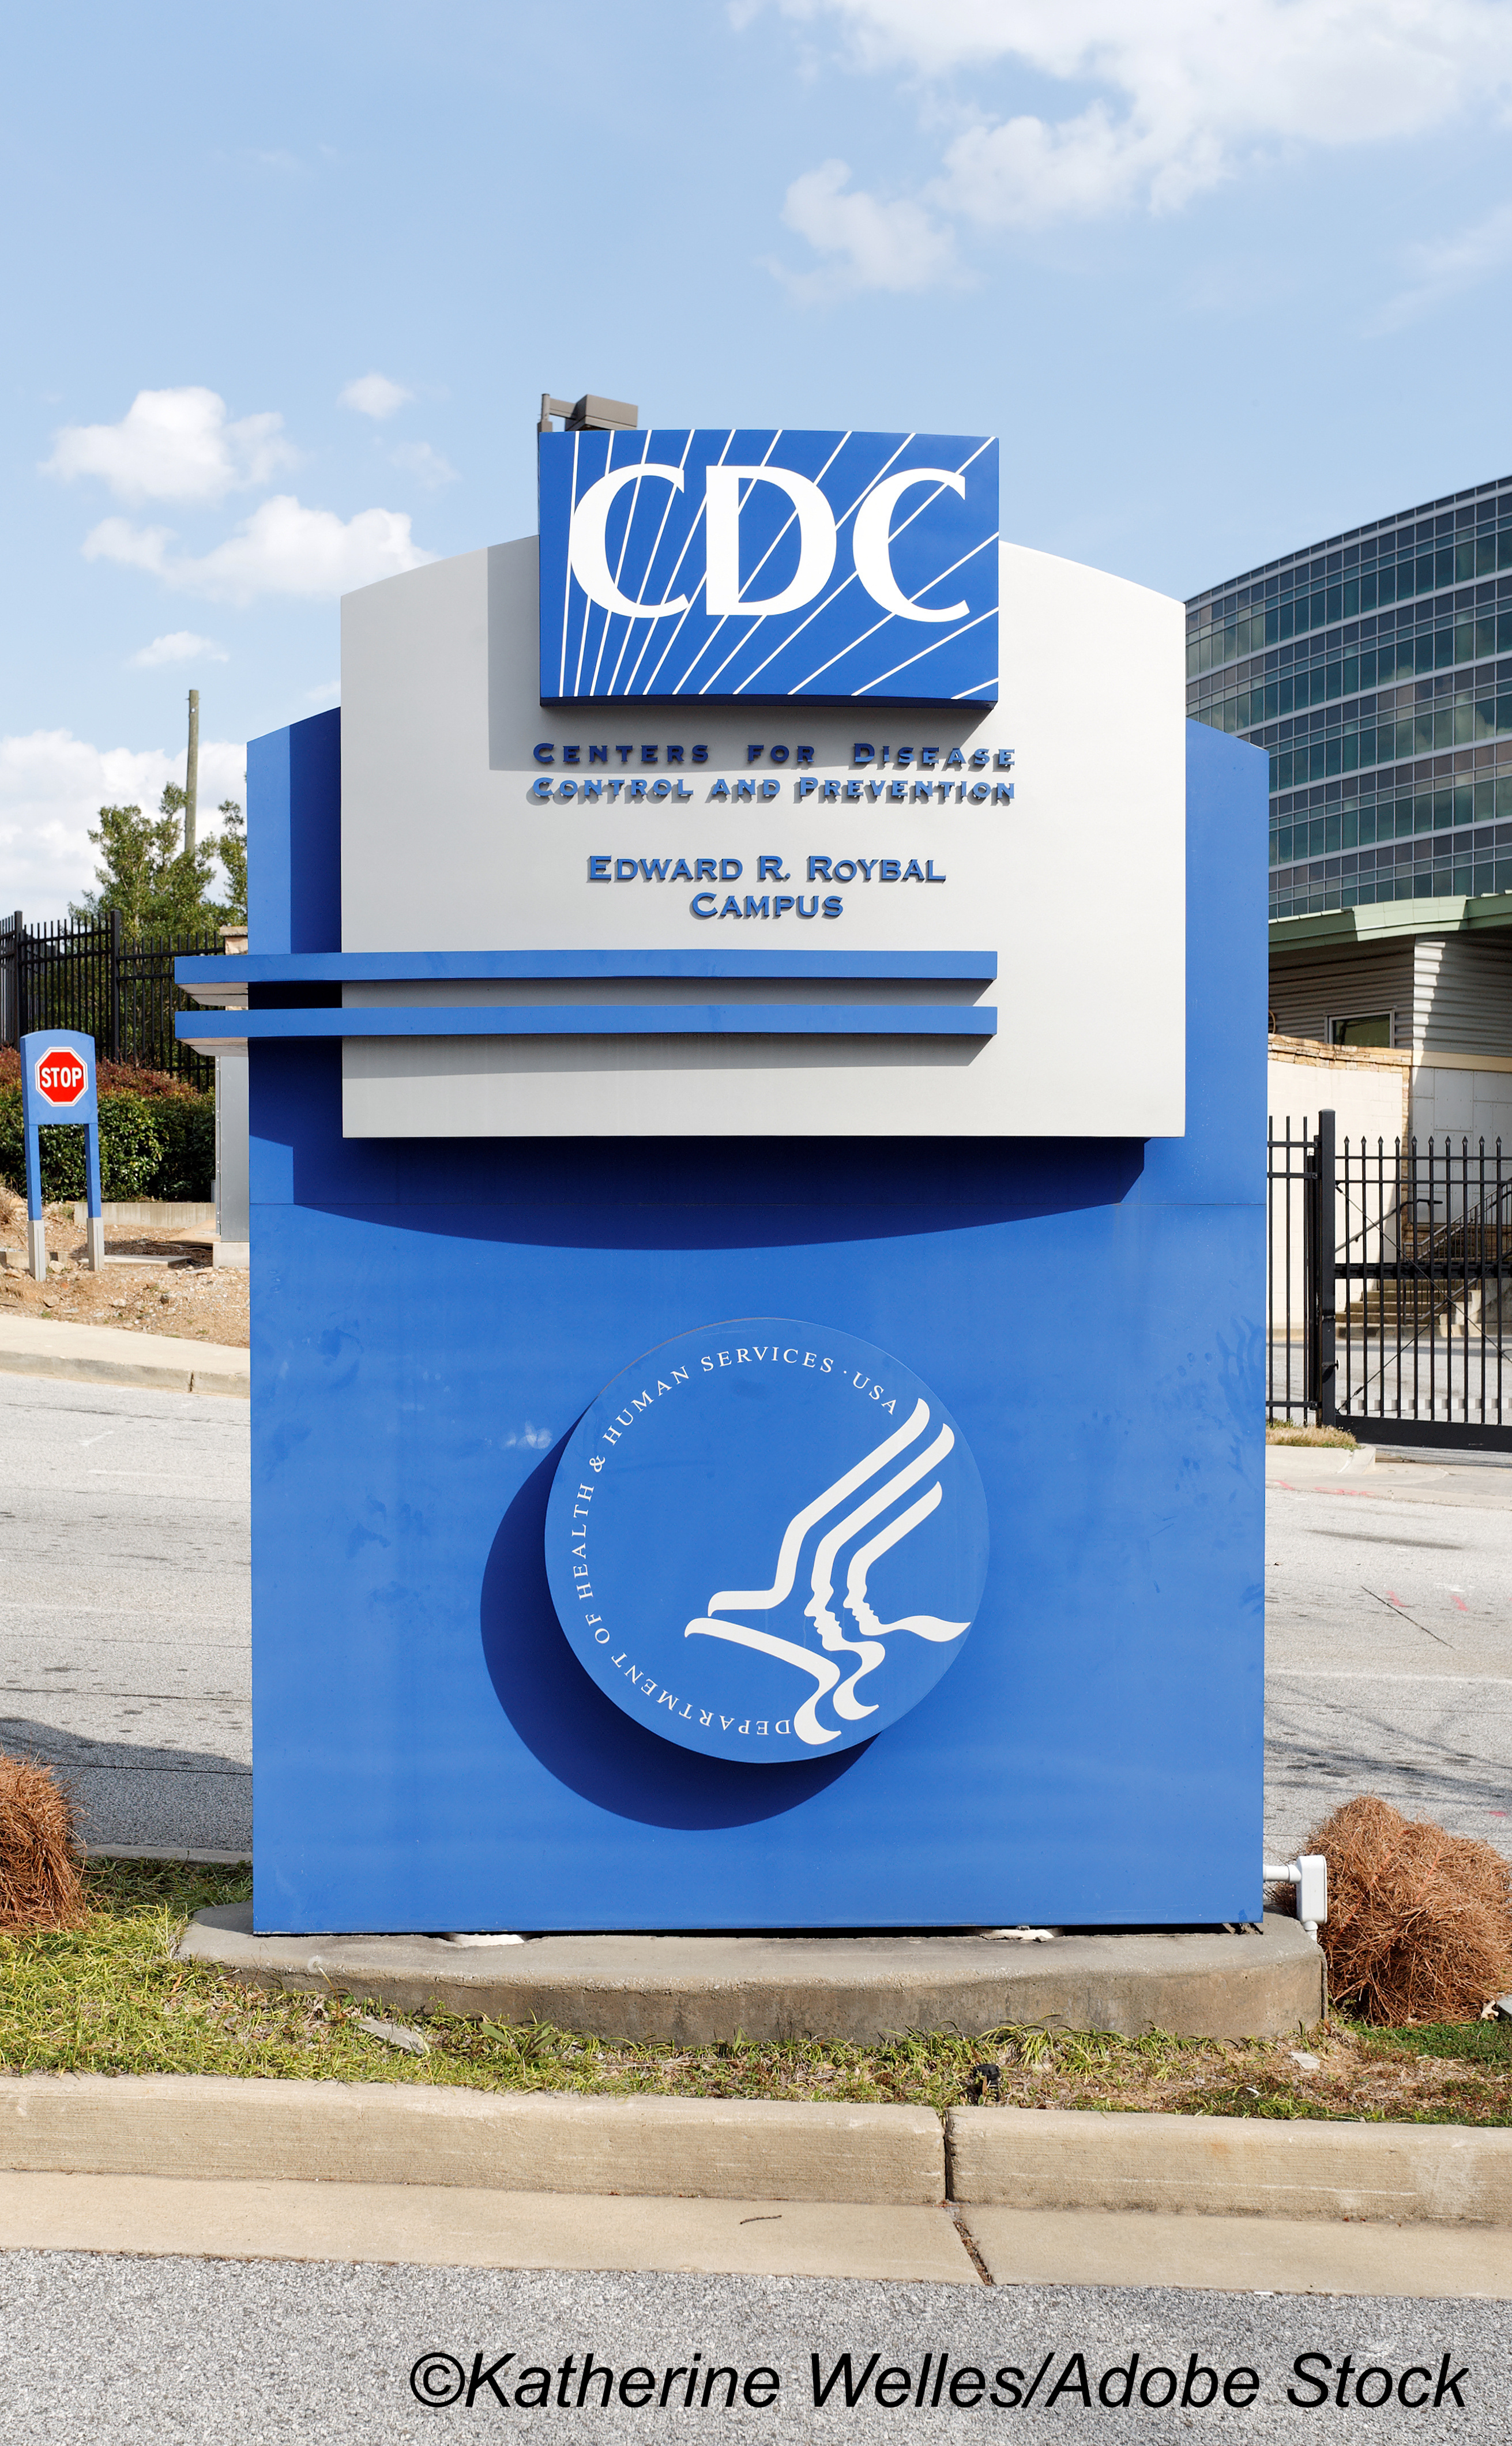 CDC Director Overrides ACIP, Recommends Covid Boosters For At-Risk Workers